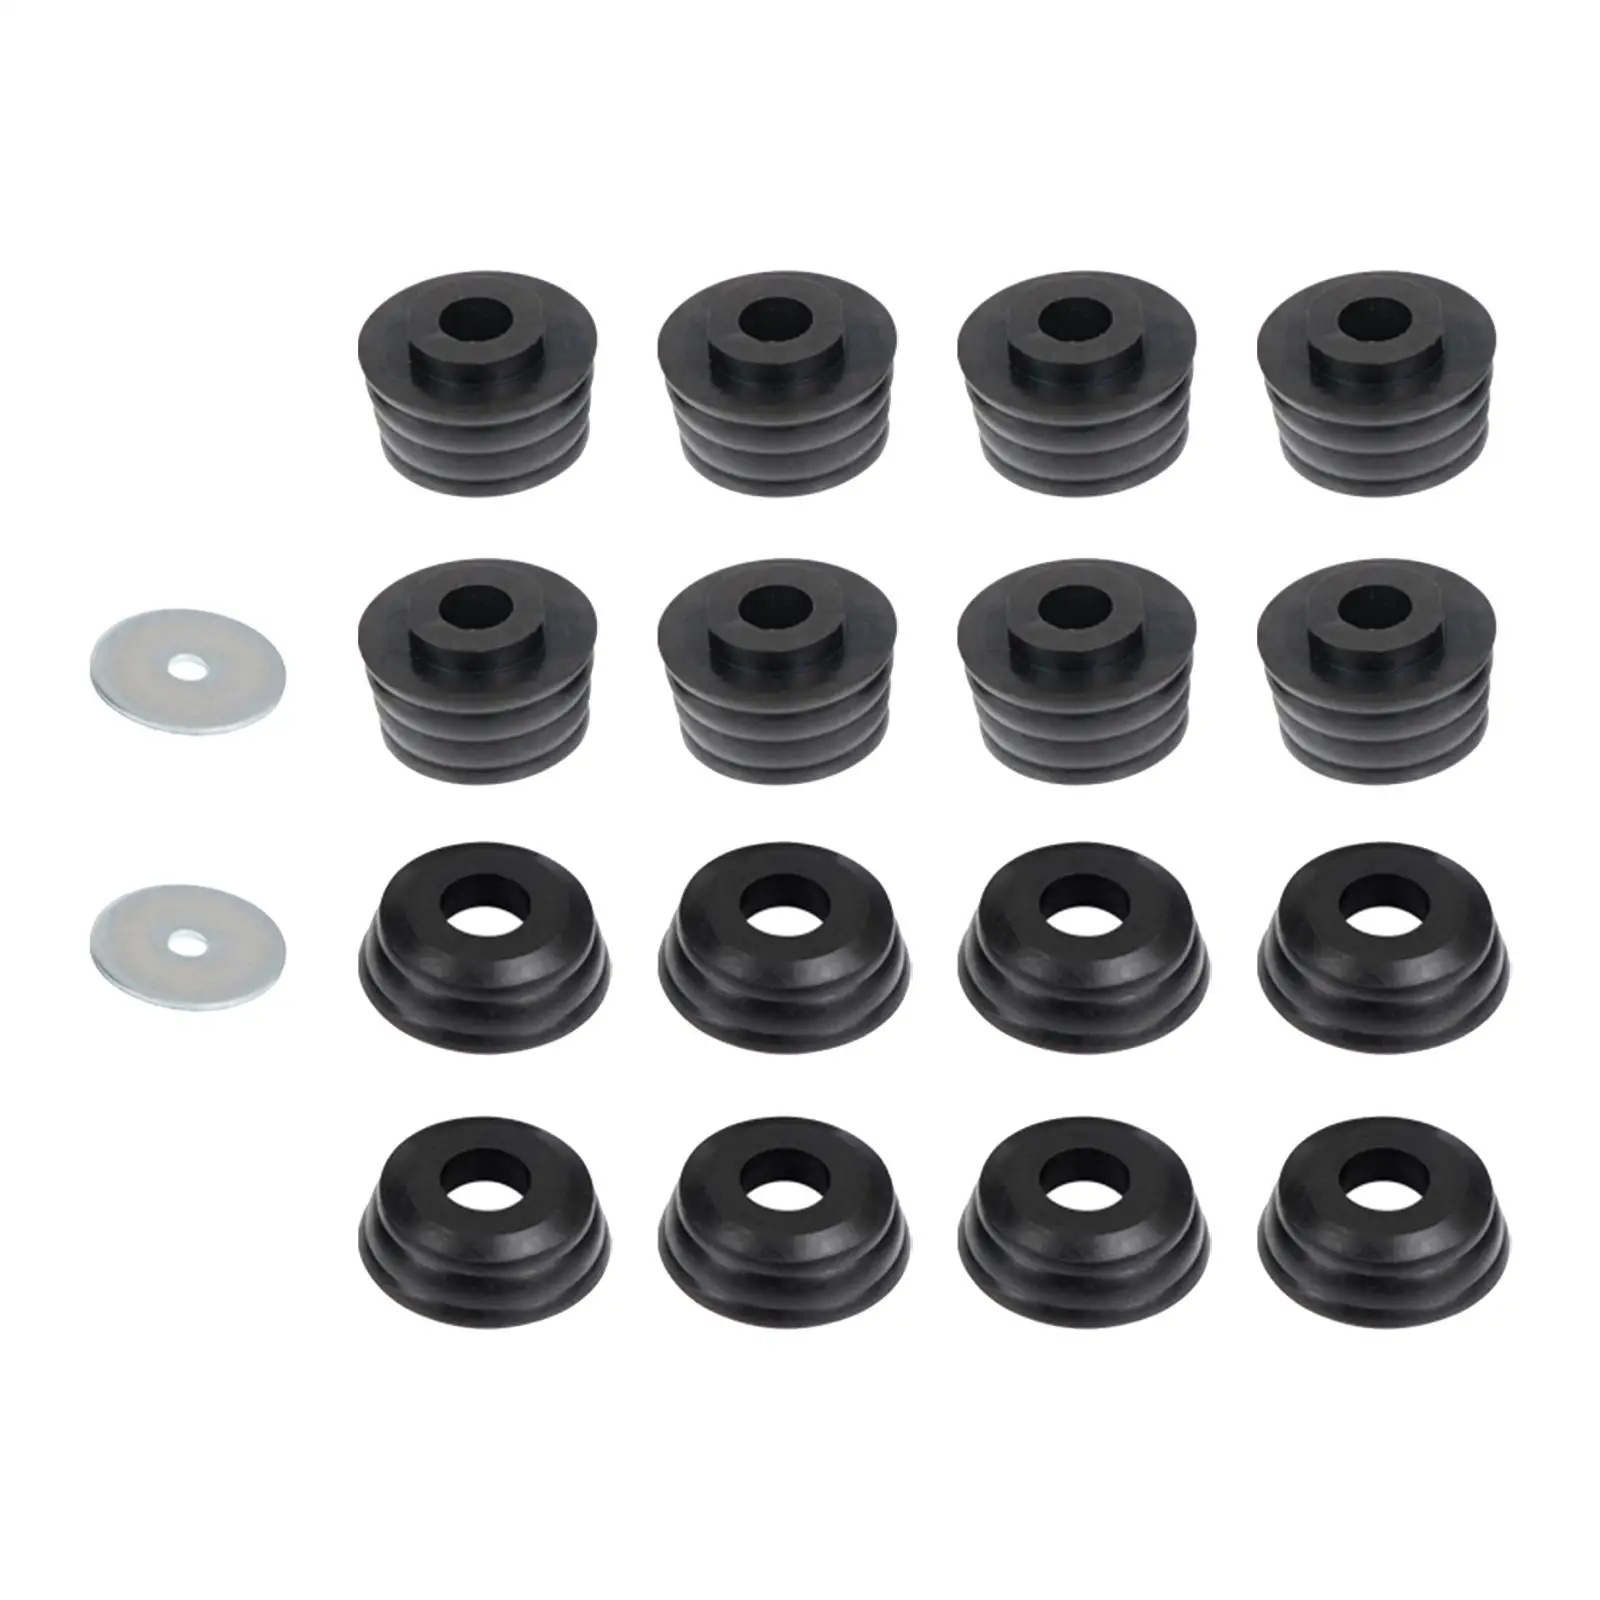 Body Cab Bushing Kit Easy Installation Spare Parts Black Body Cab Mounts Washers for GMC Sierra 2WD 4WD 1999-2014 1500 2500